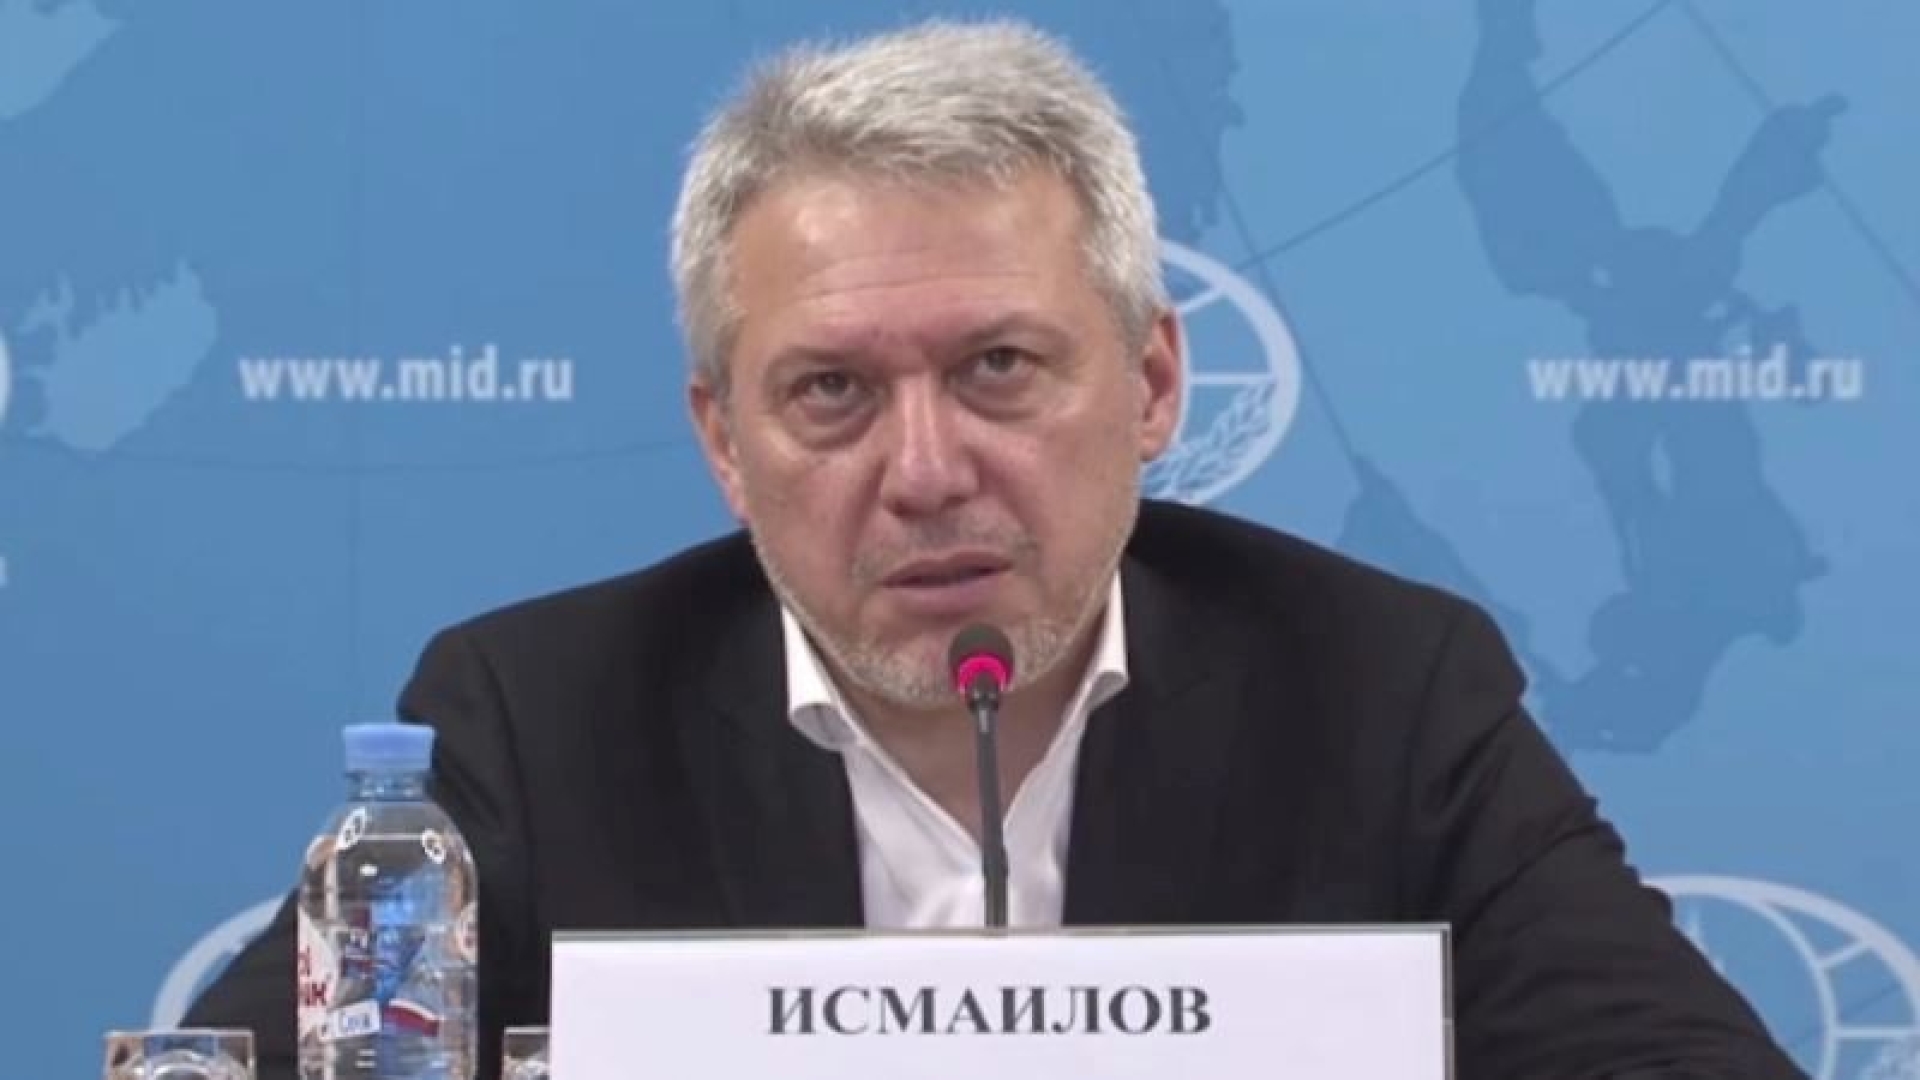 Rashid Ismailov: "Western sanctions are a cool thing, they create opportunities"